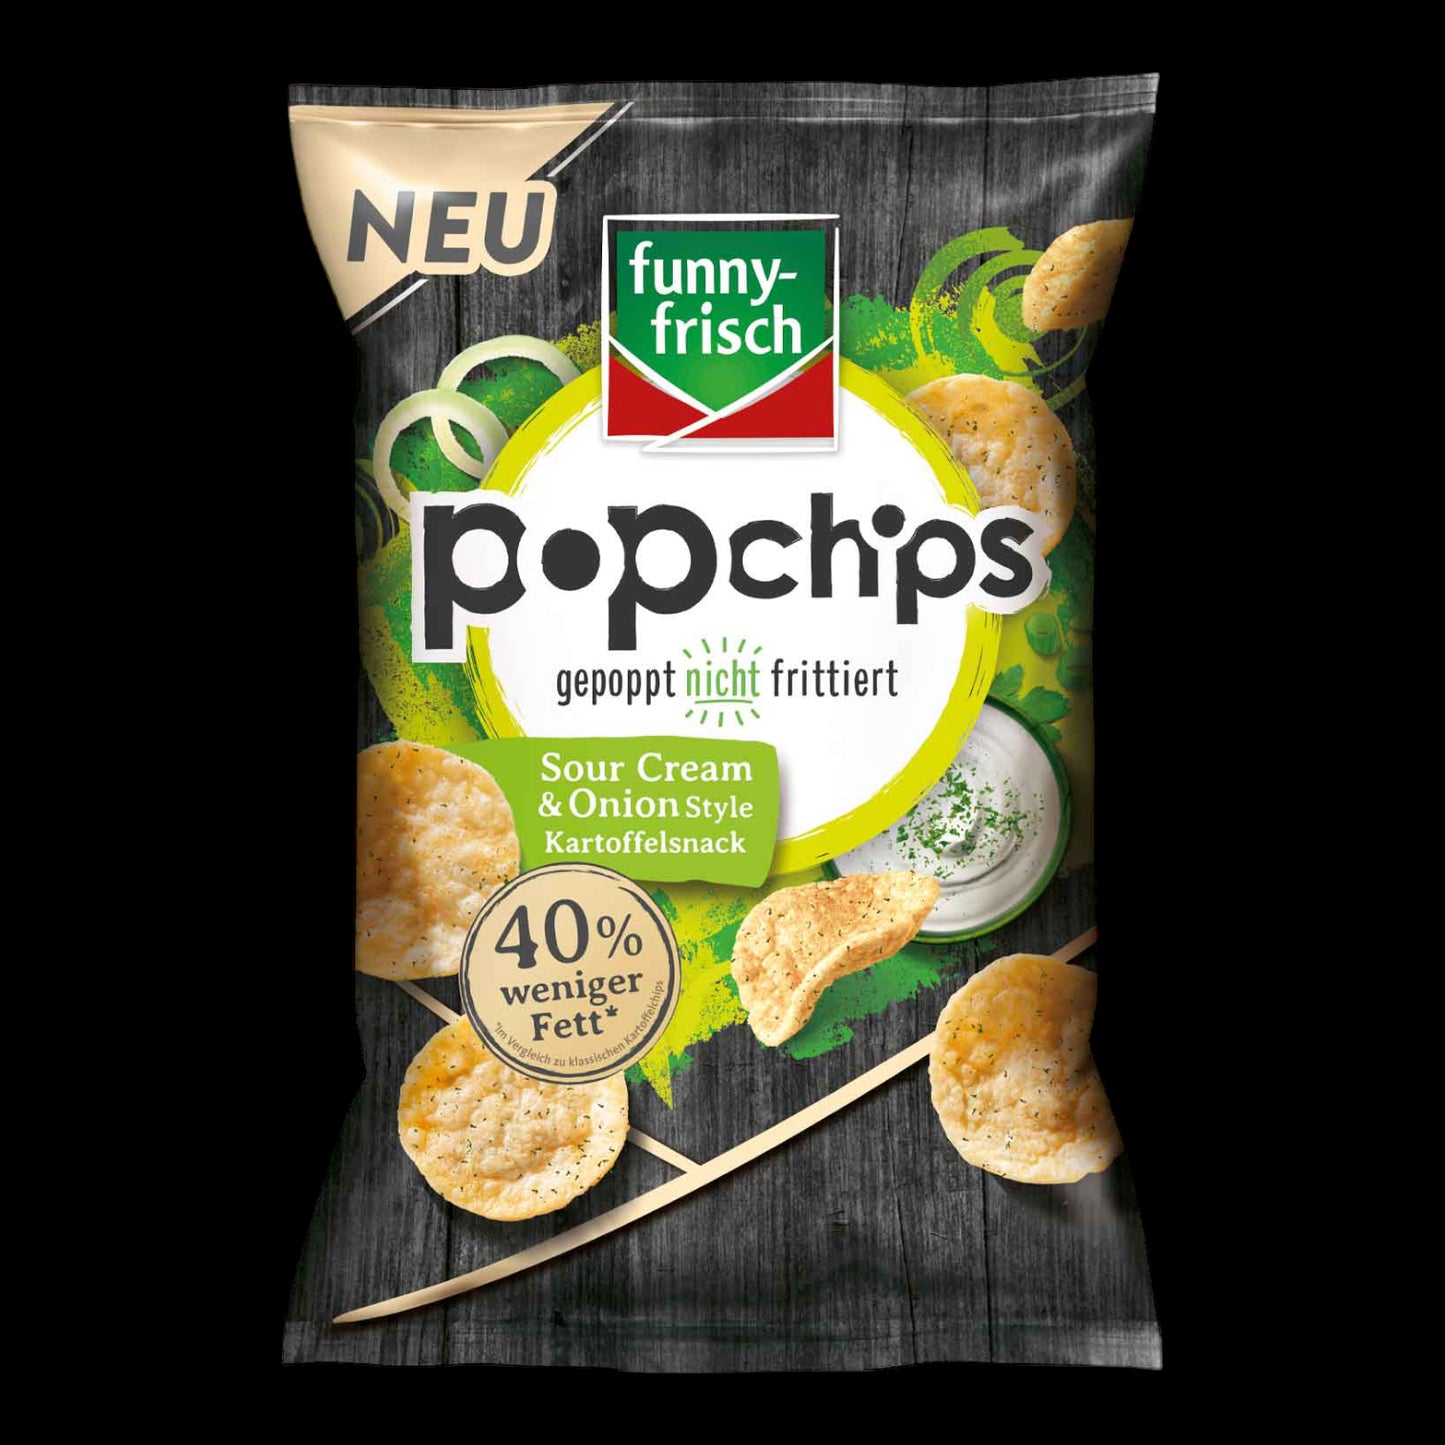 funny-frisch Popchips Sour Cream & Onion Style 80g